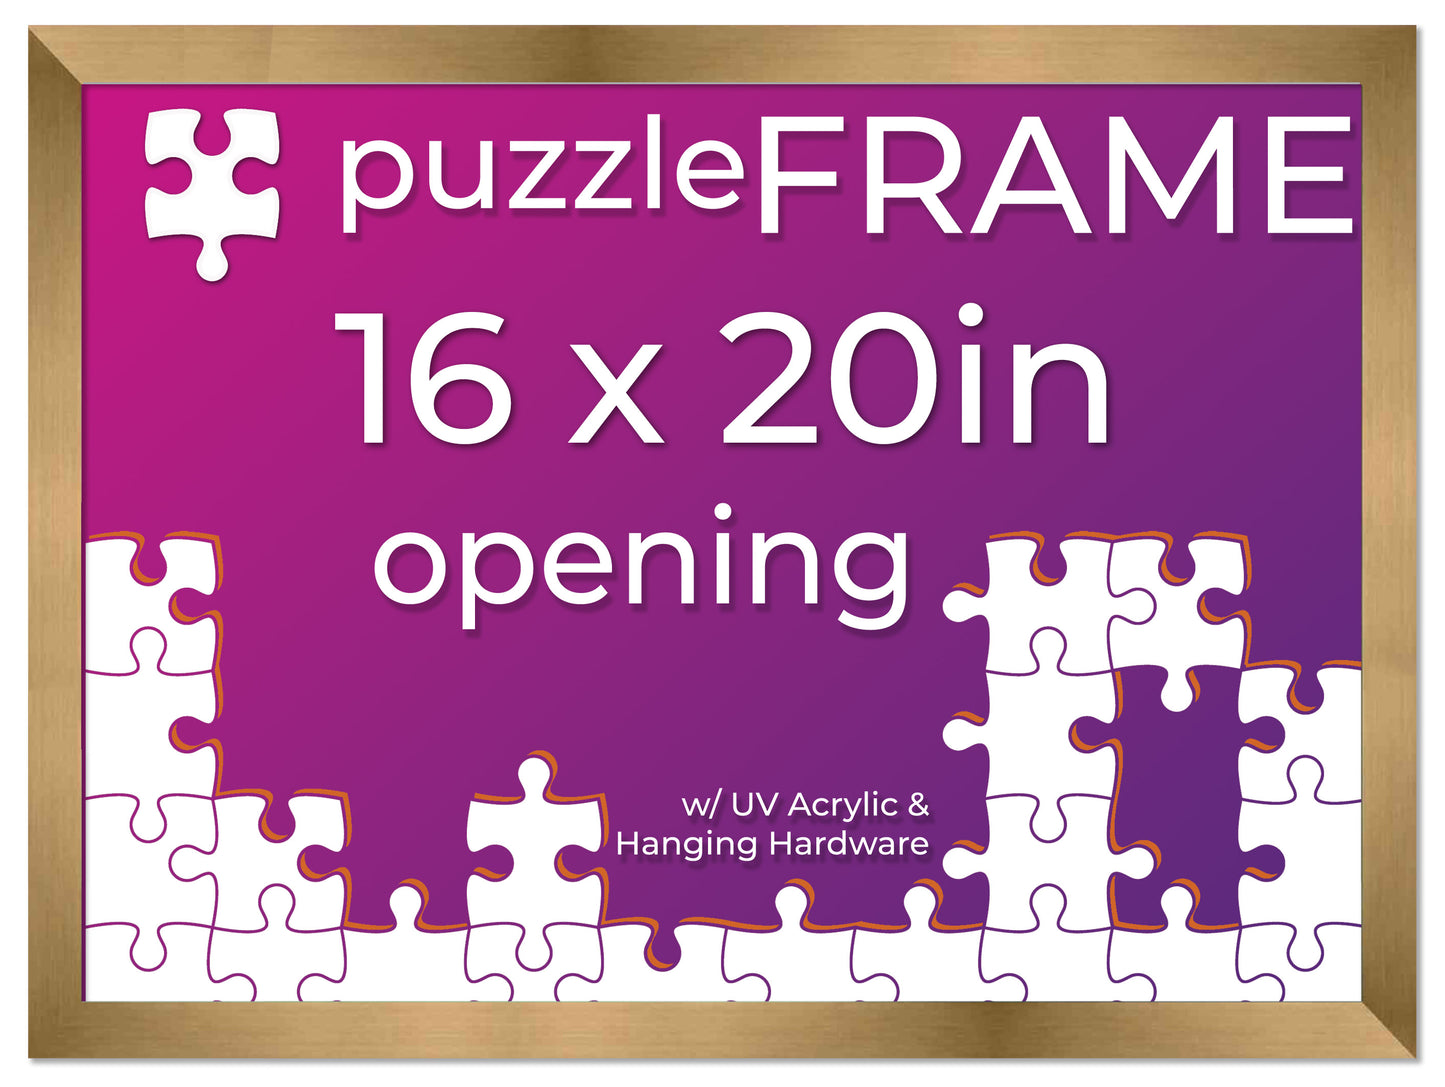 Bronze Frame for Jigsaw Puzzles